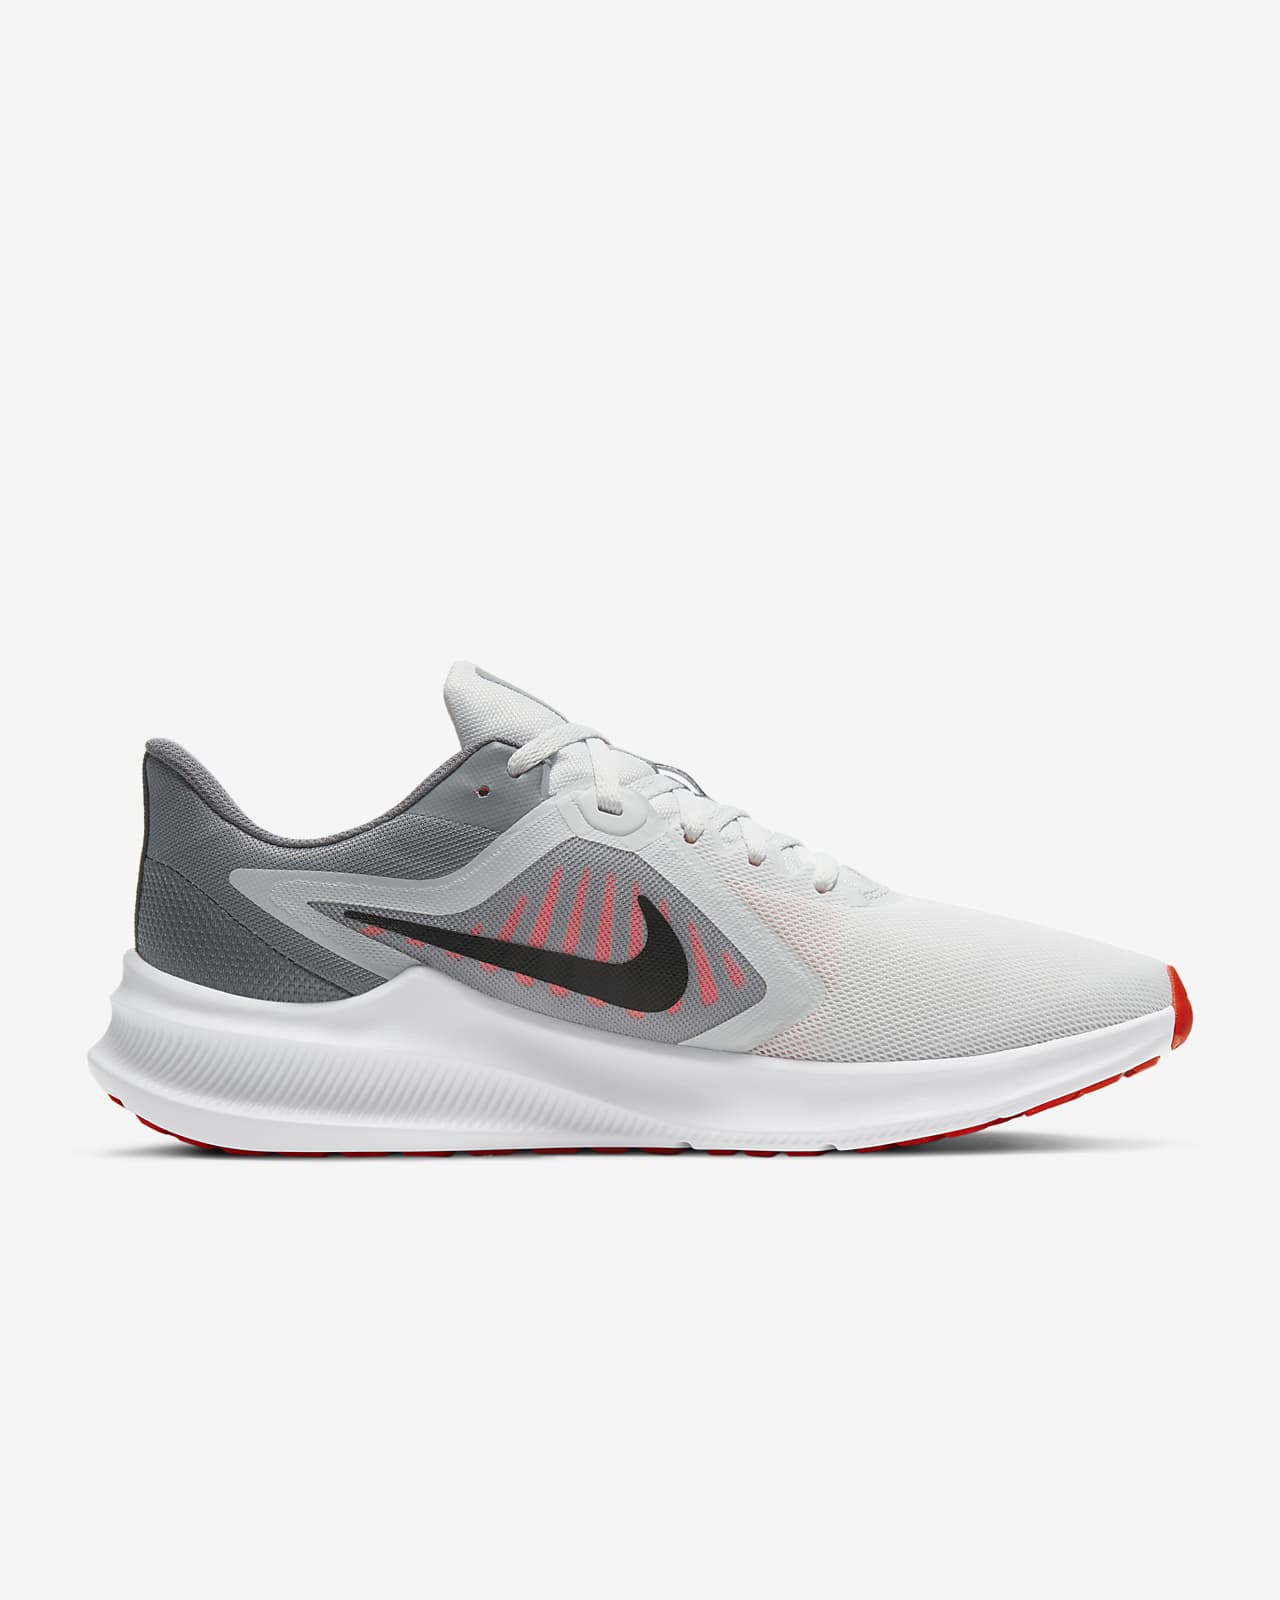 Downshifter 10 Men's Road Running Shoes. Nike ID